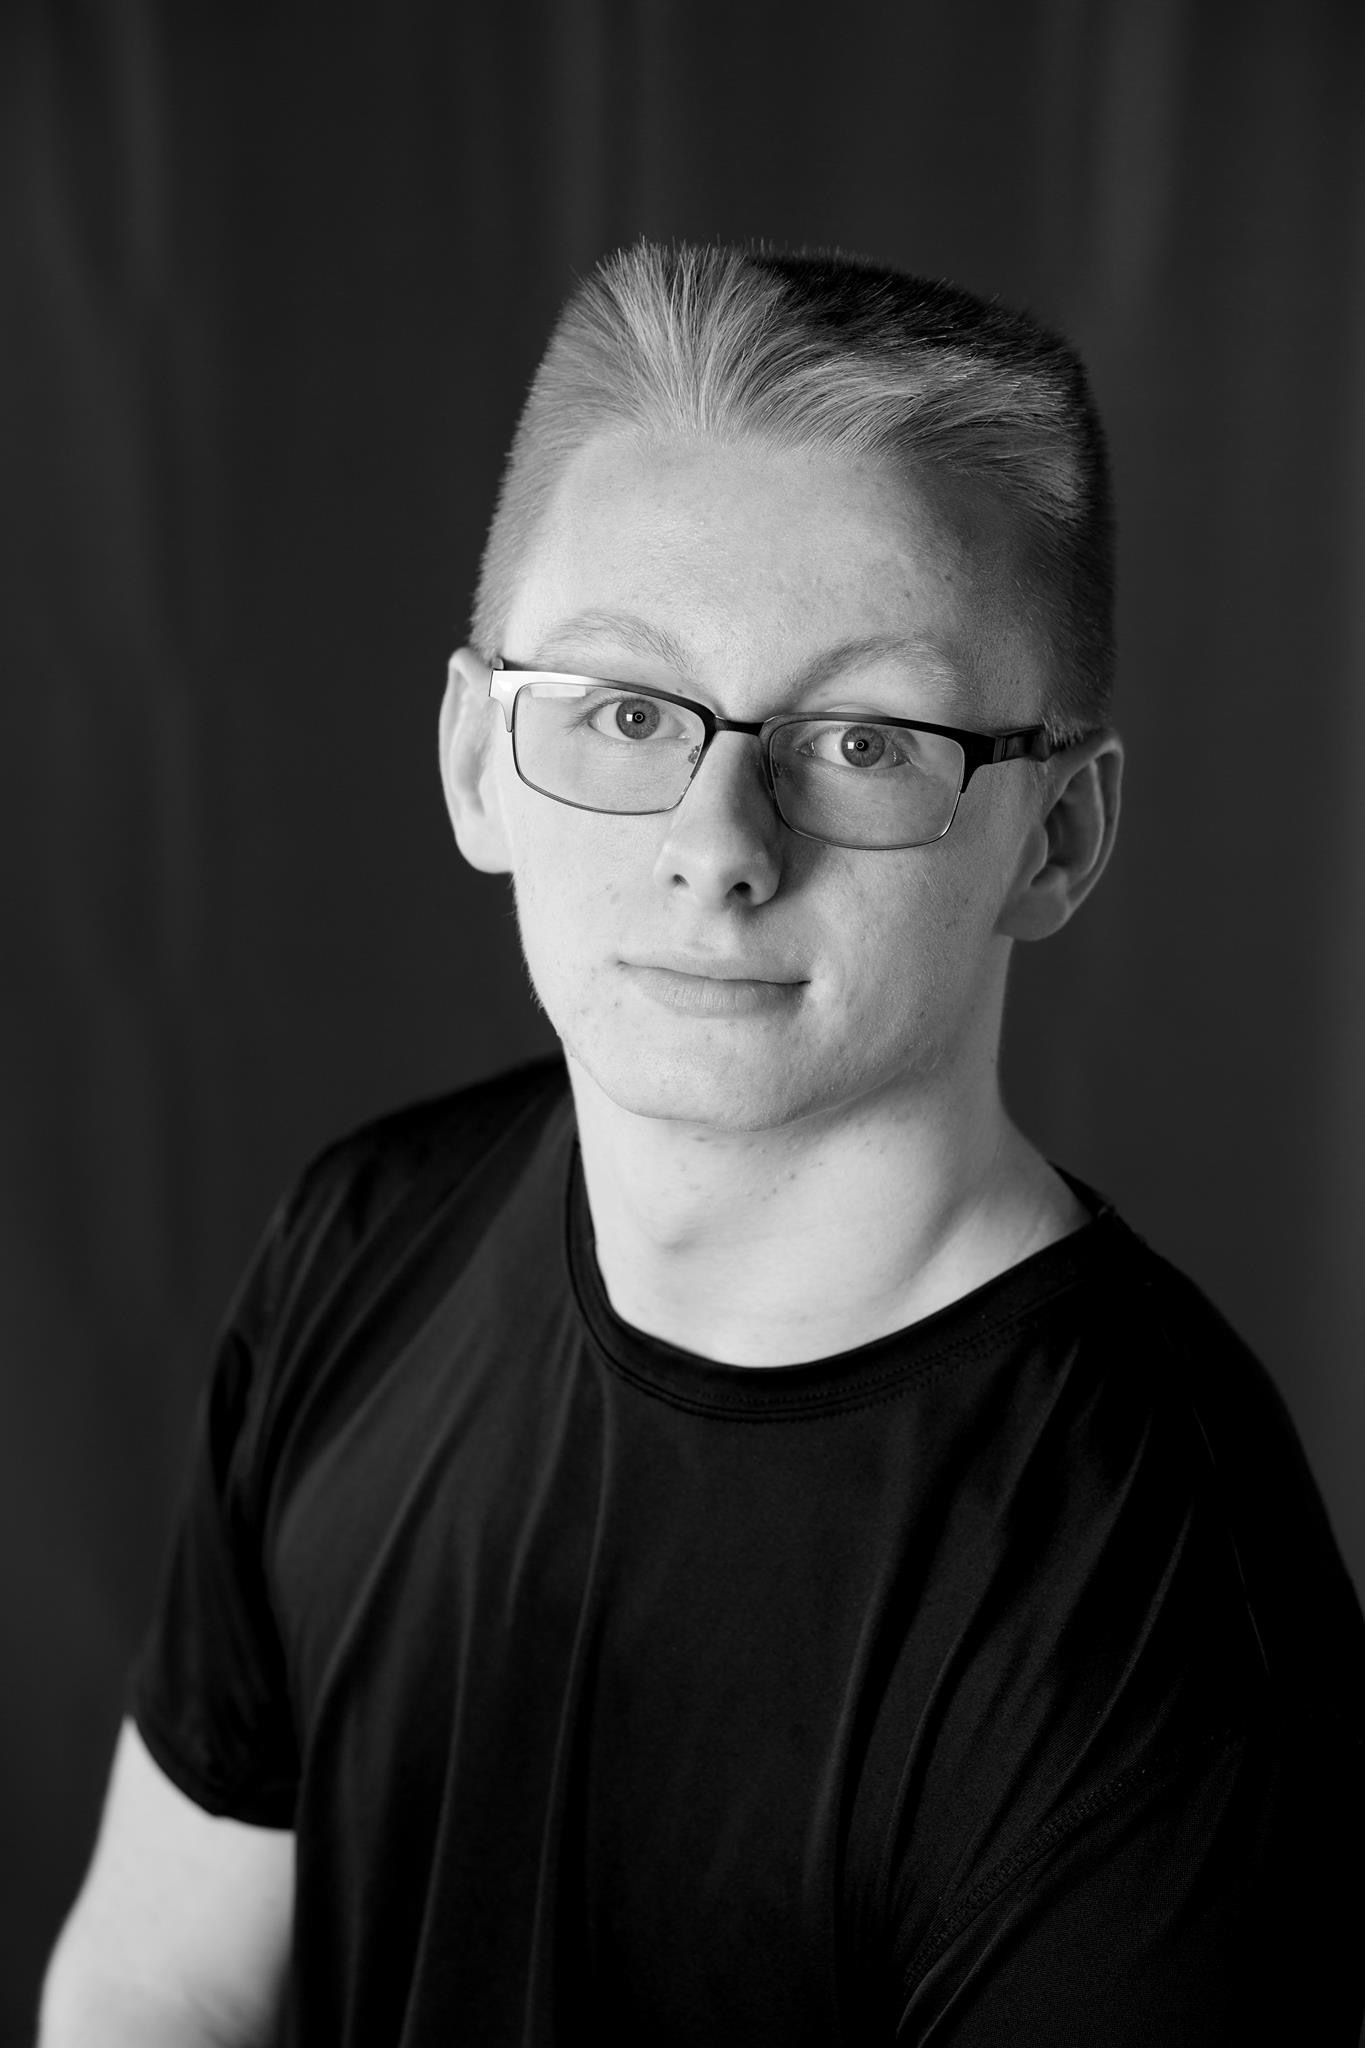 Senior Cast Member Rhees Hancock:
Rhees plays the role of R.F. Simpson and Production Singer in 